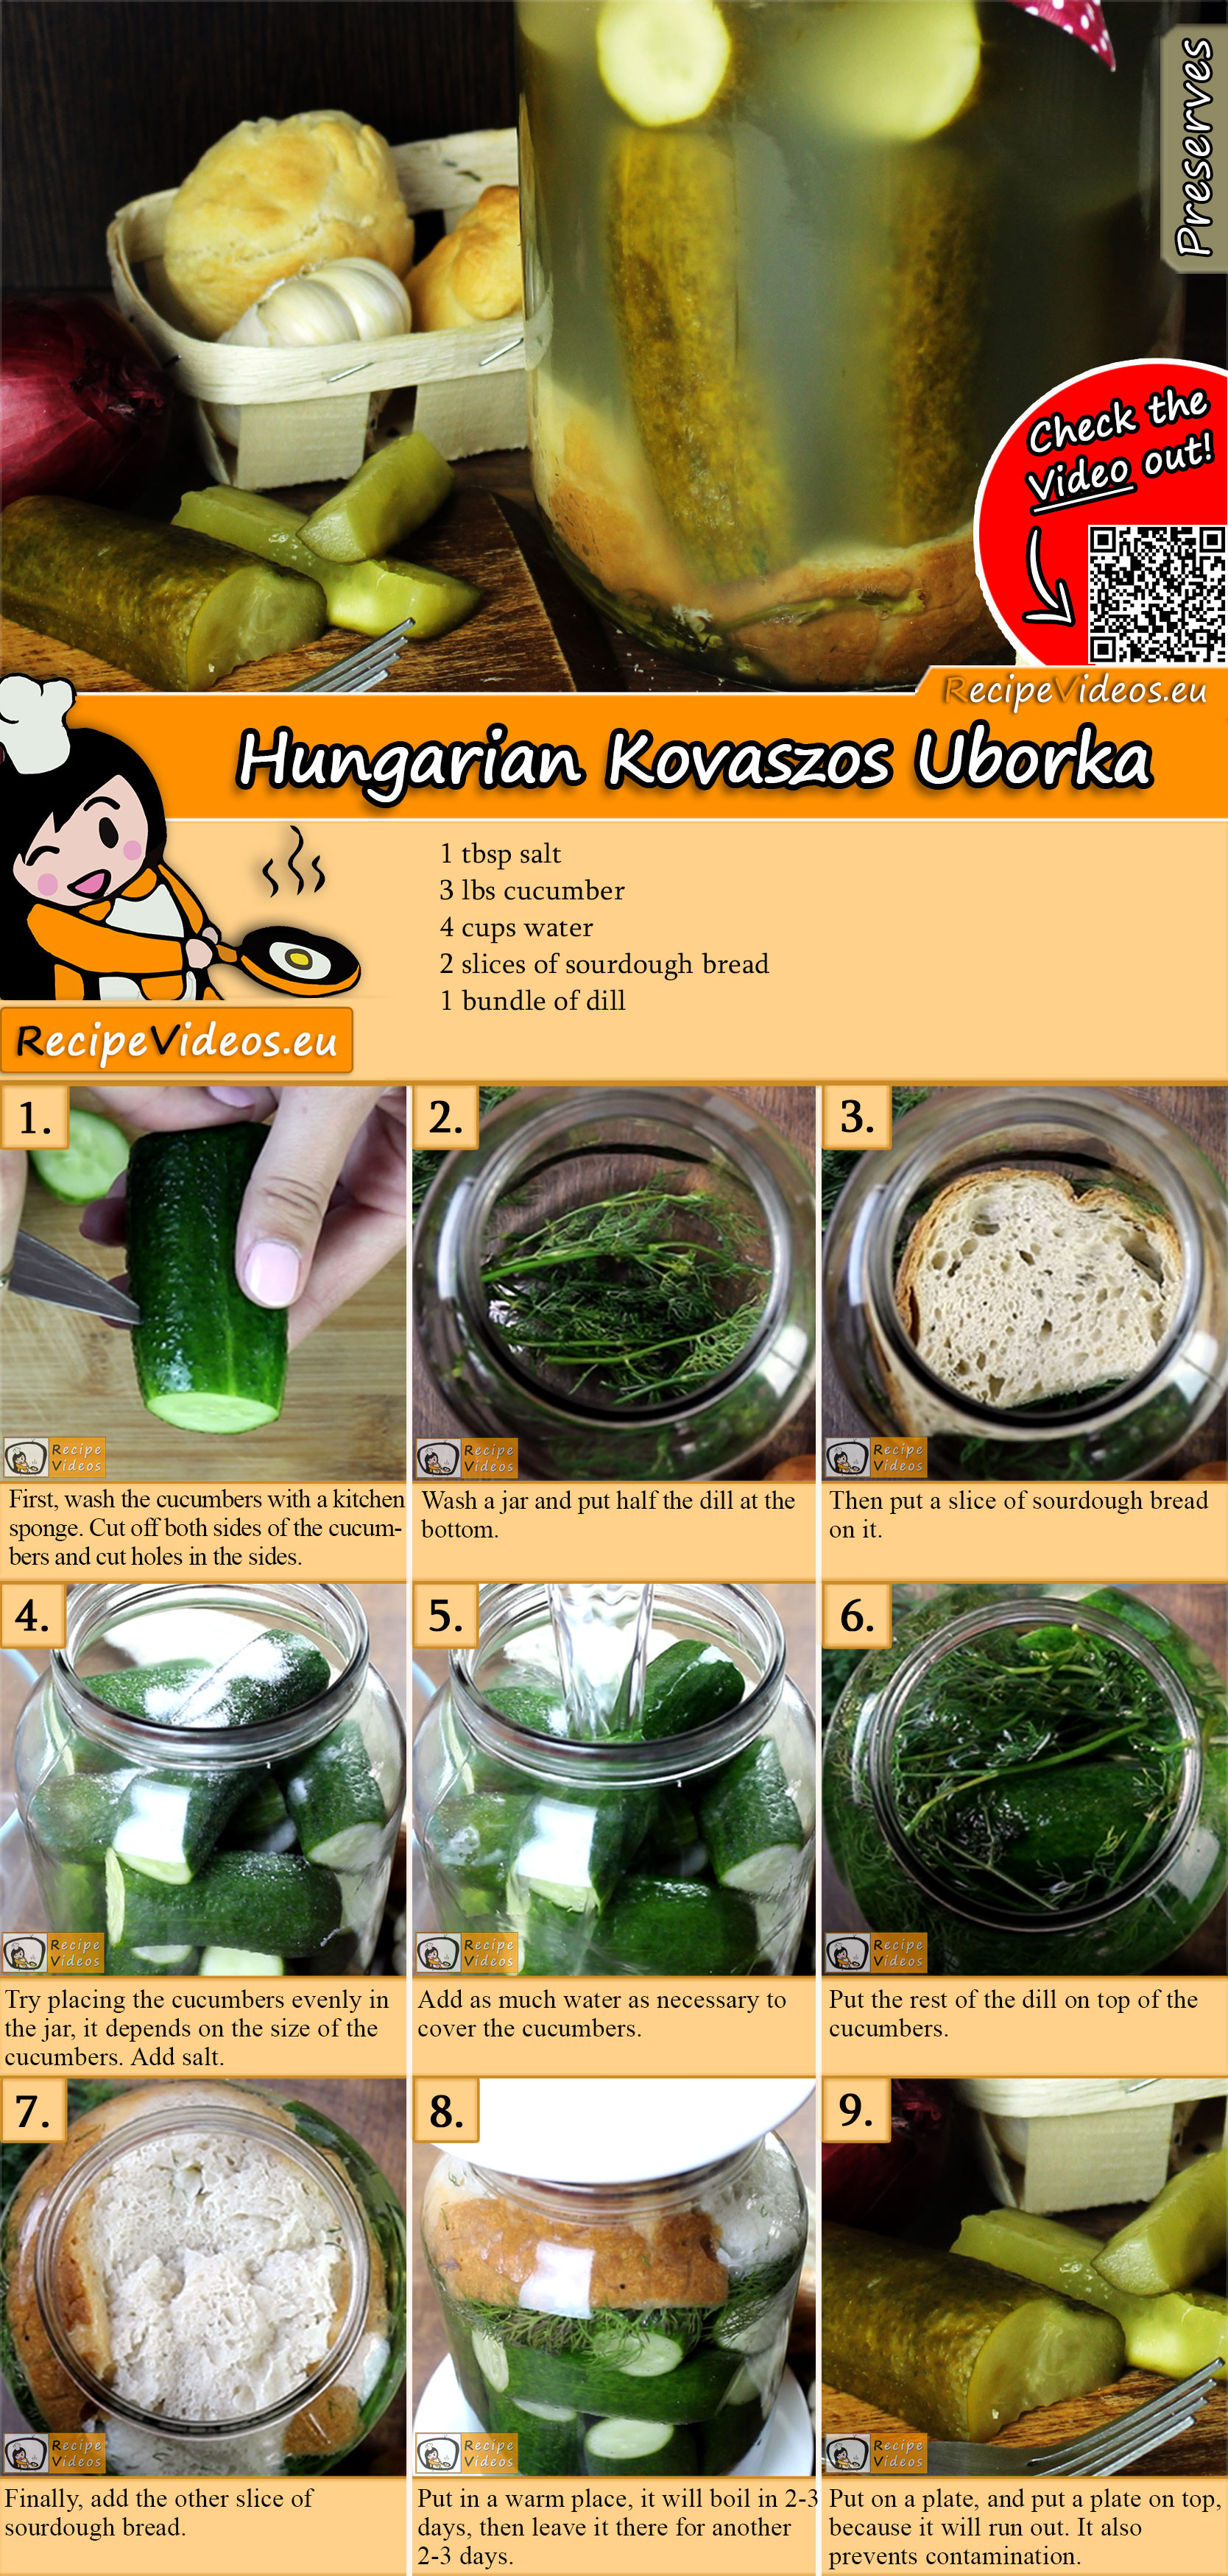 Hungarian Kovaszos Uborka (Sour Pickles) recipe with video